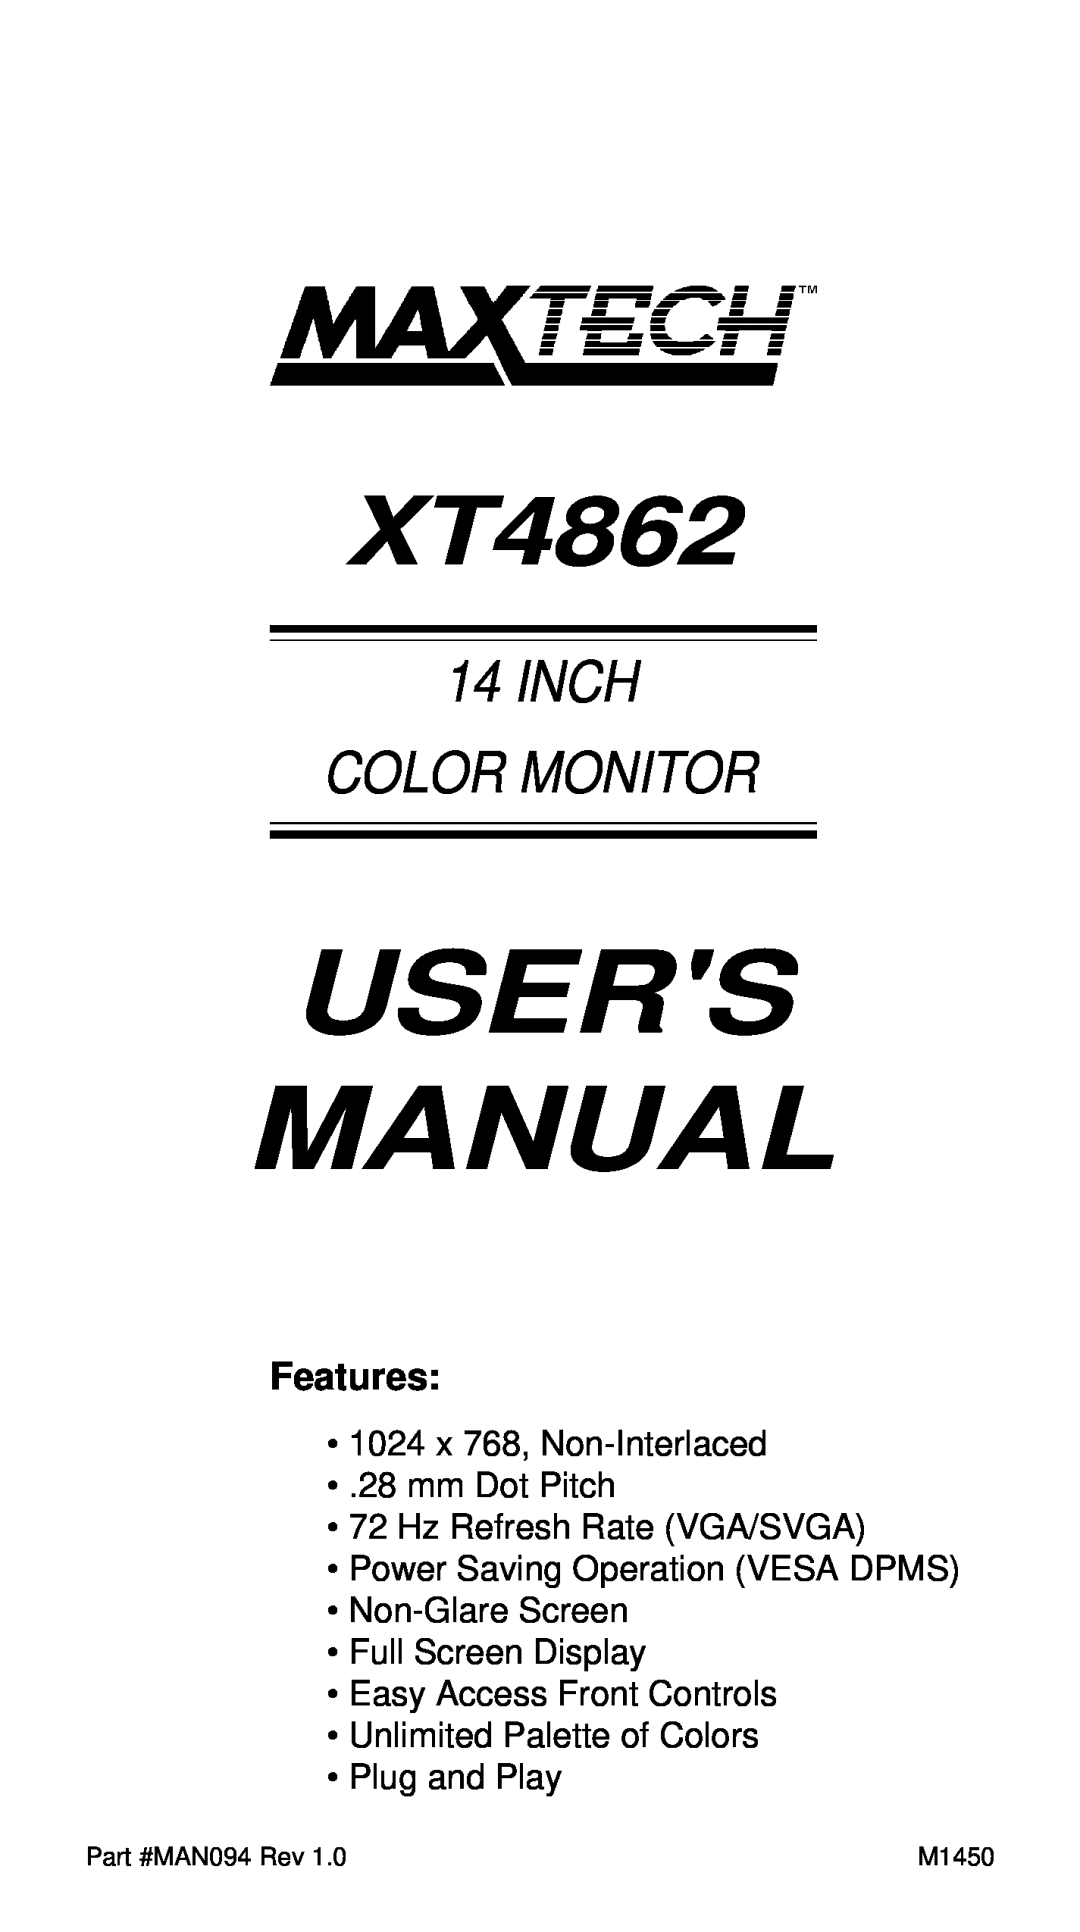 MaxTech XT4862 user manual 1024 x 768, Non-Interlaced 28 mm Dot Pitch, Unlimited Palette of Colors Plug and Play, Features 